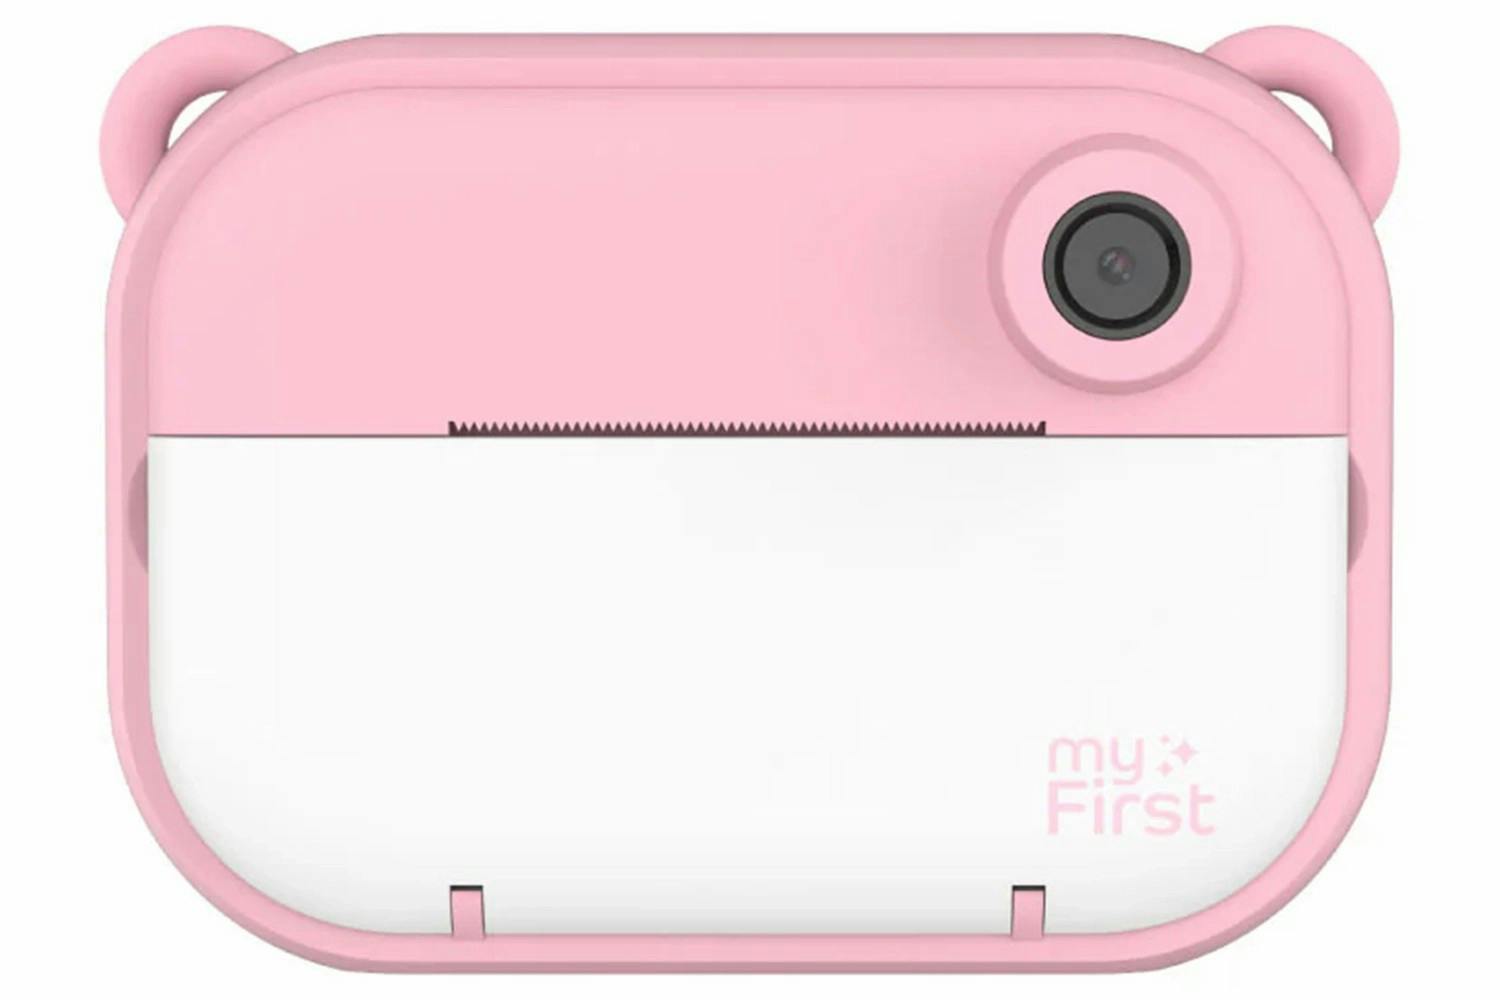 MyFirst Camera Insta 2 Instant Print Camera & Thermal Printer with Paper Refills | Pink